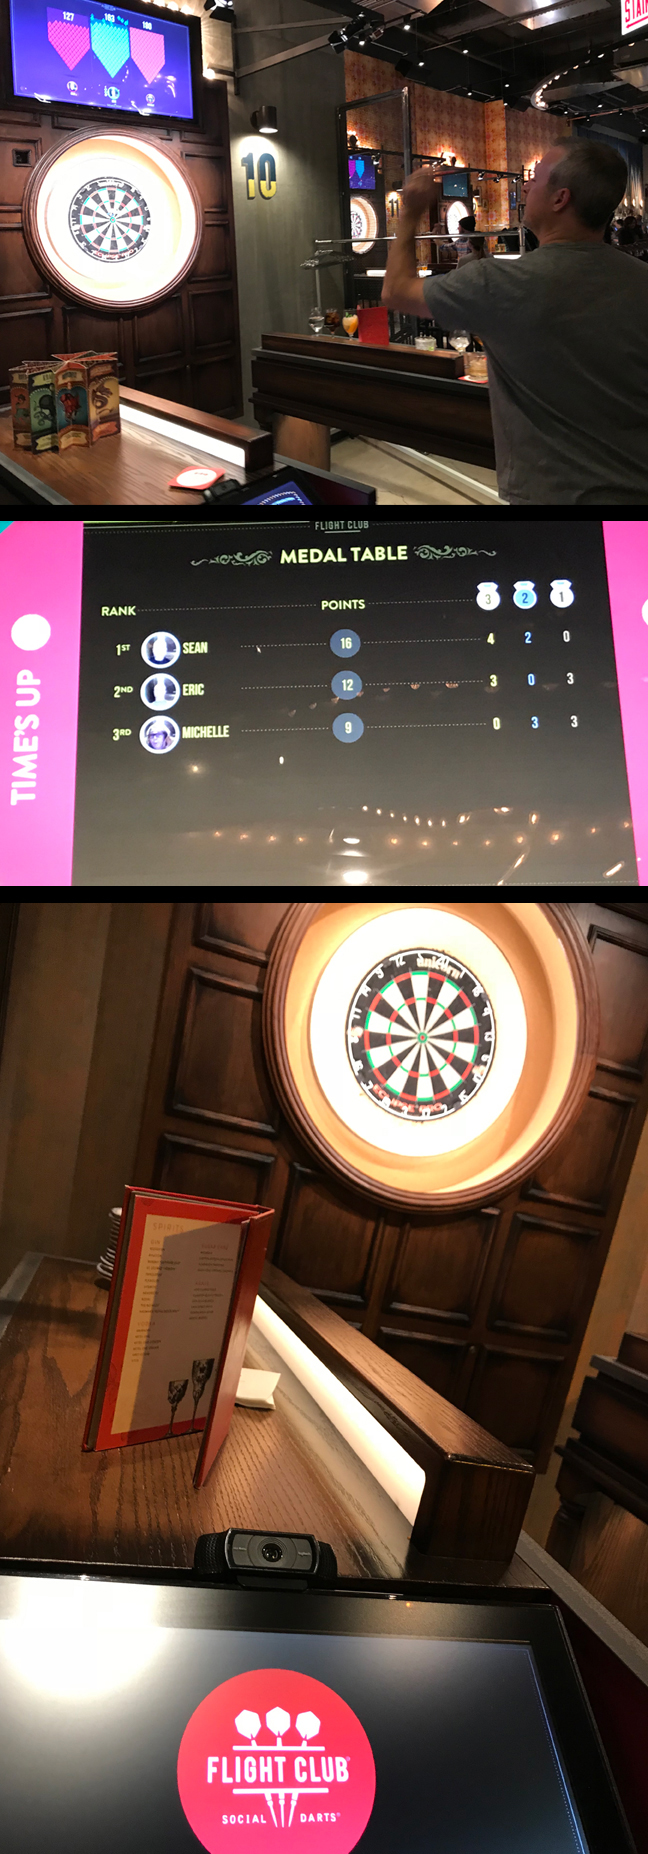 Playing Steel Tip Darts at Flight Club Chicago. (Top) A close-up look at the player experience while throwing darts from the oche; (Middle) The scoreboard/monitor; and (Bottom) A close-up look at the kiosk.